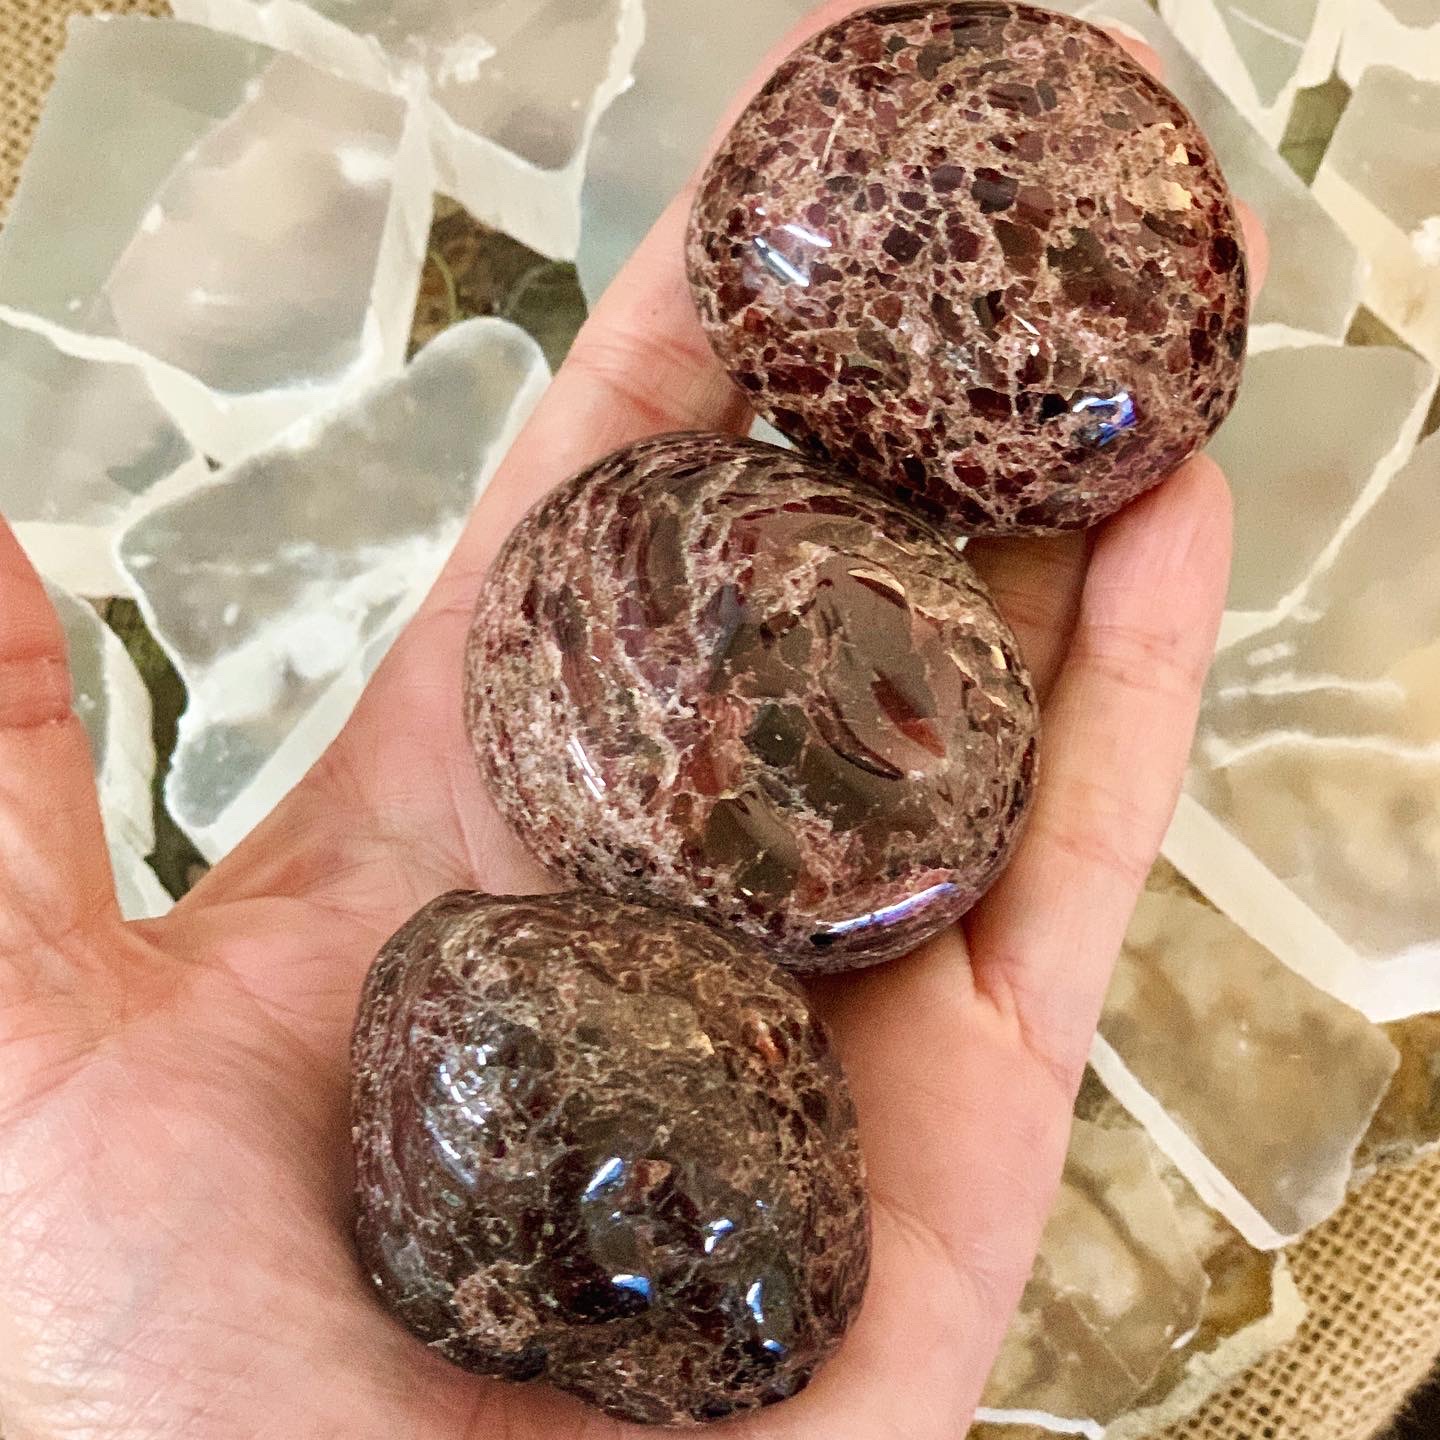 Three red Garnets the size of a palm lay in a hand.